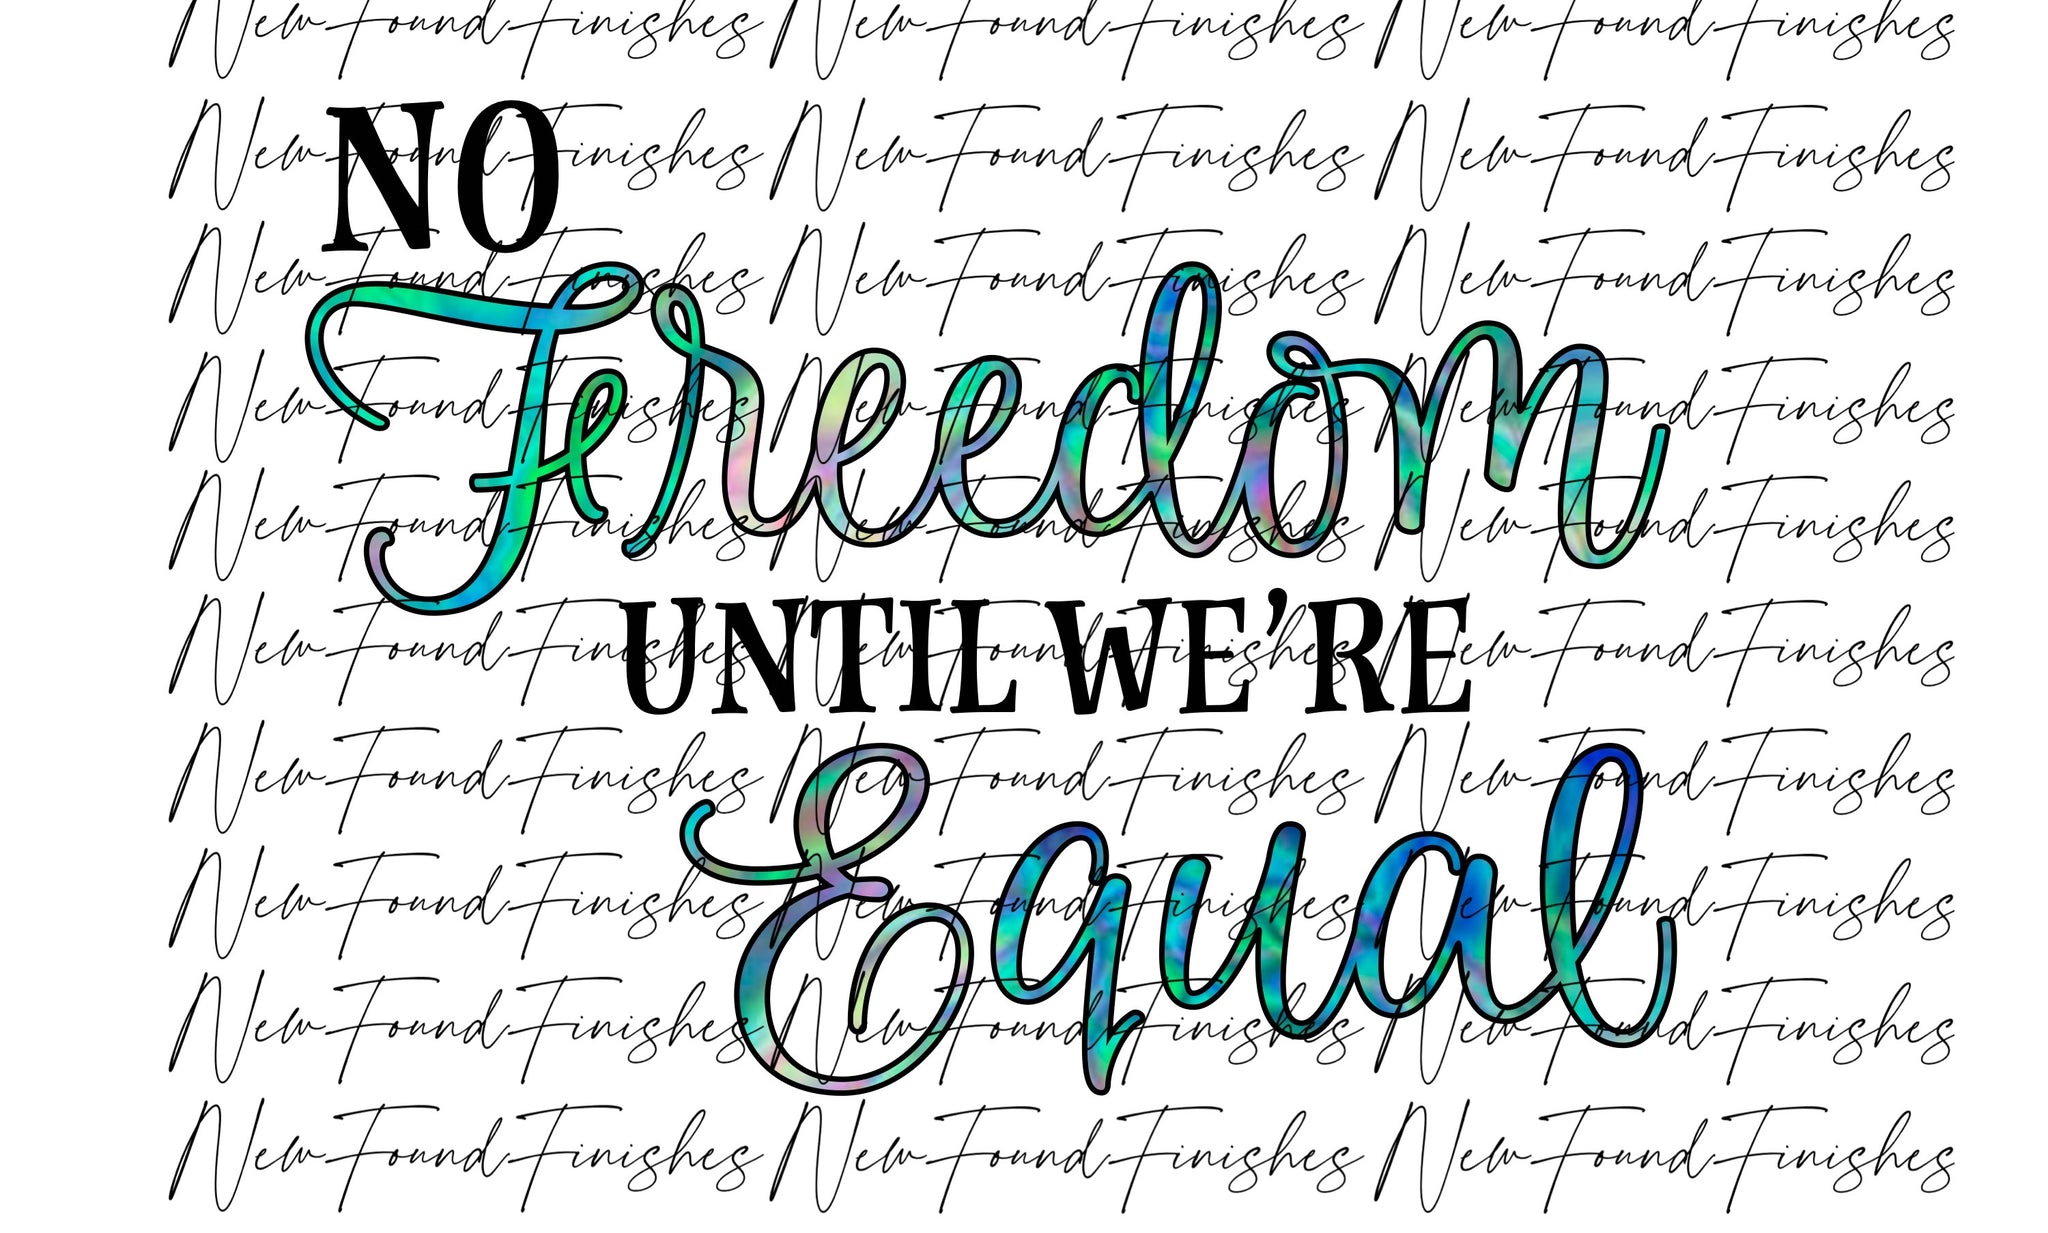 No freedom until we’re equal